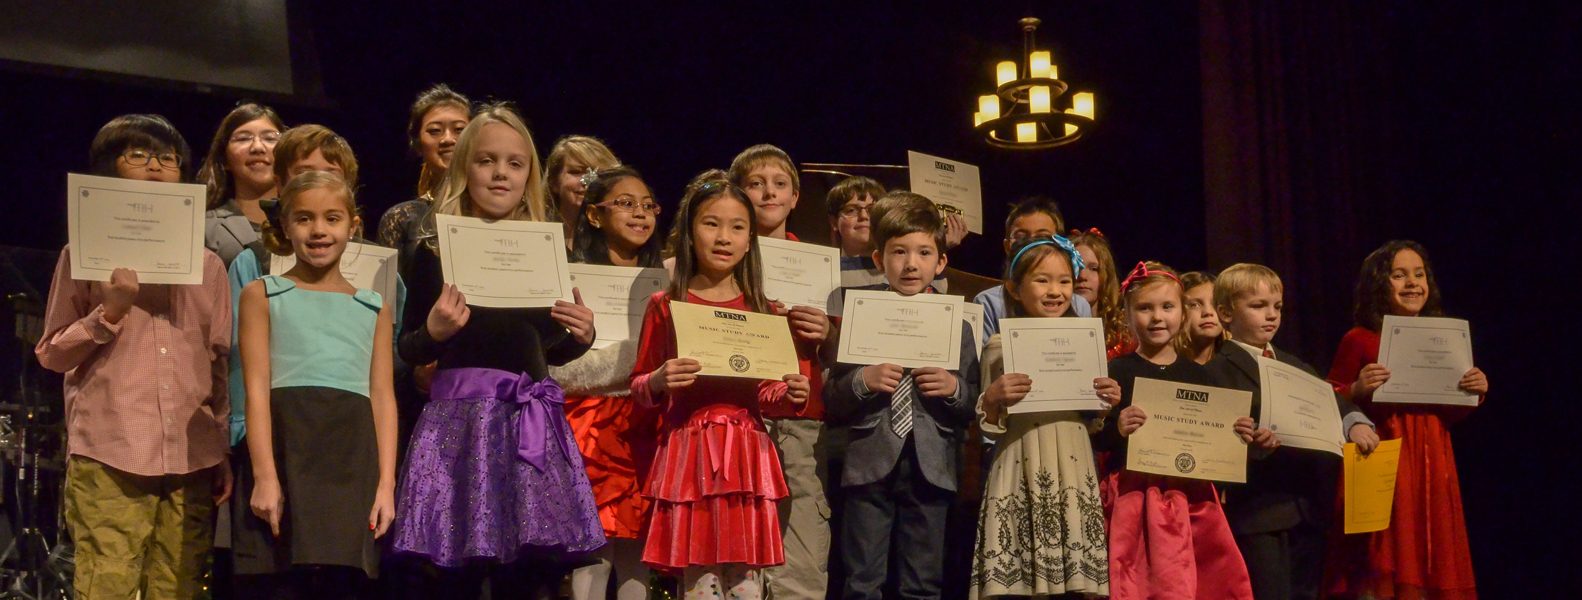 Over twenty The Art of Piano students line up with their certificates after the 2014 Winter recital